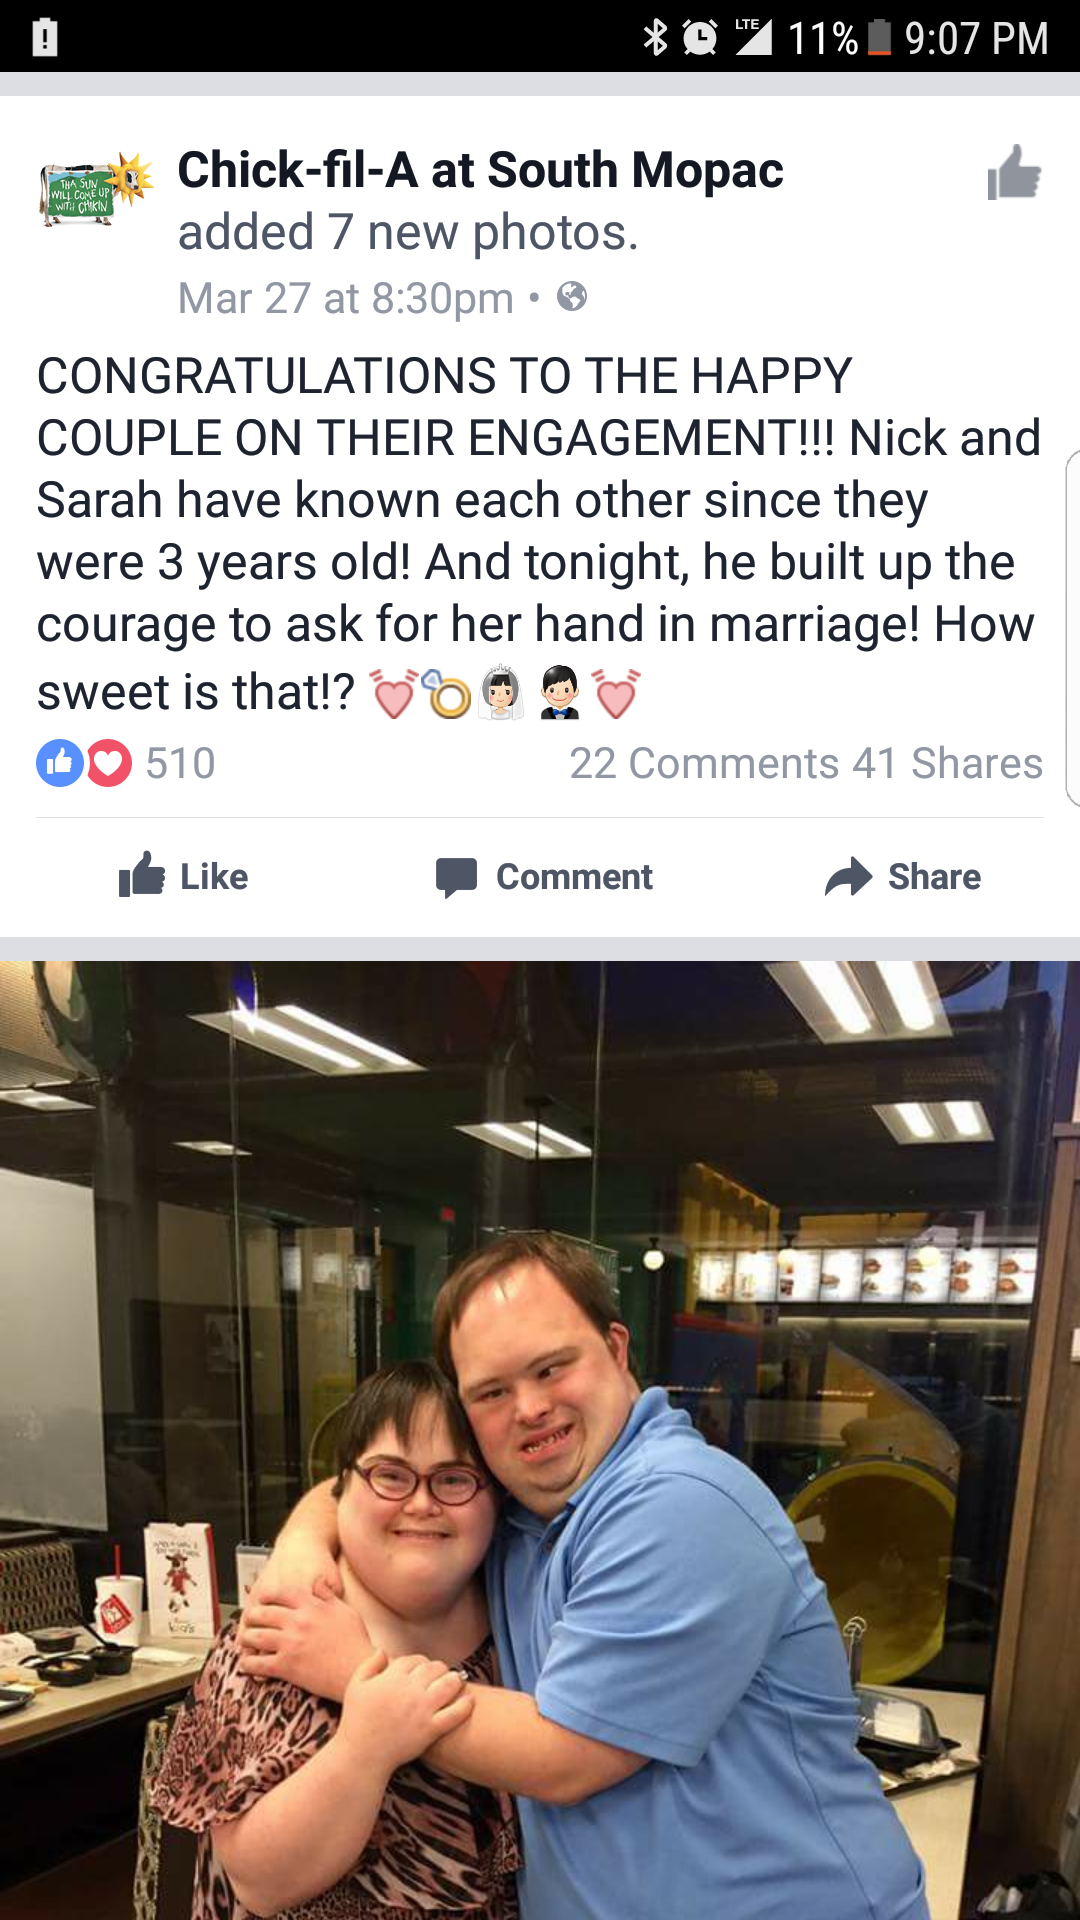 photo caption - 36 % 11% 1 ChickfilA at South Mopac added 7 new photos. Mar 27 at pm. Congratulations To The Happy Couple On Their Engagement!!! Nick and Sarah have known each other since they were 3 years old! And tonight, he built up the courage to ask 